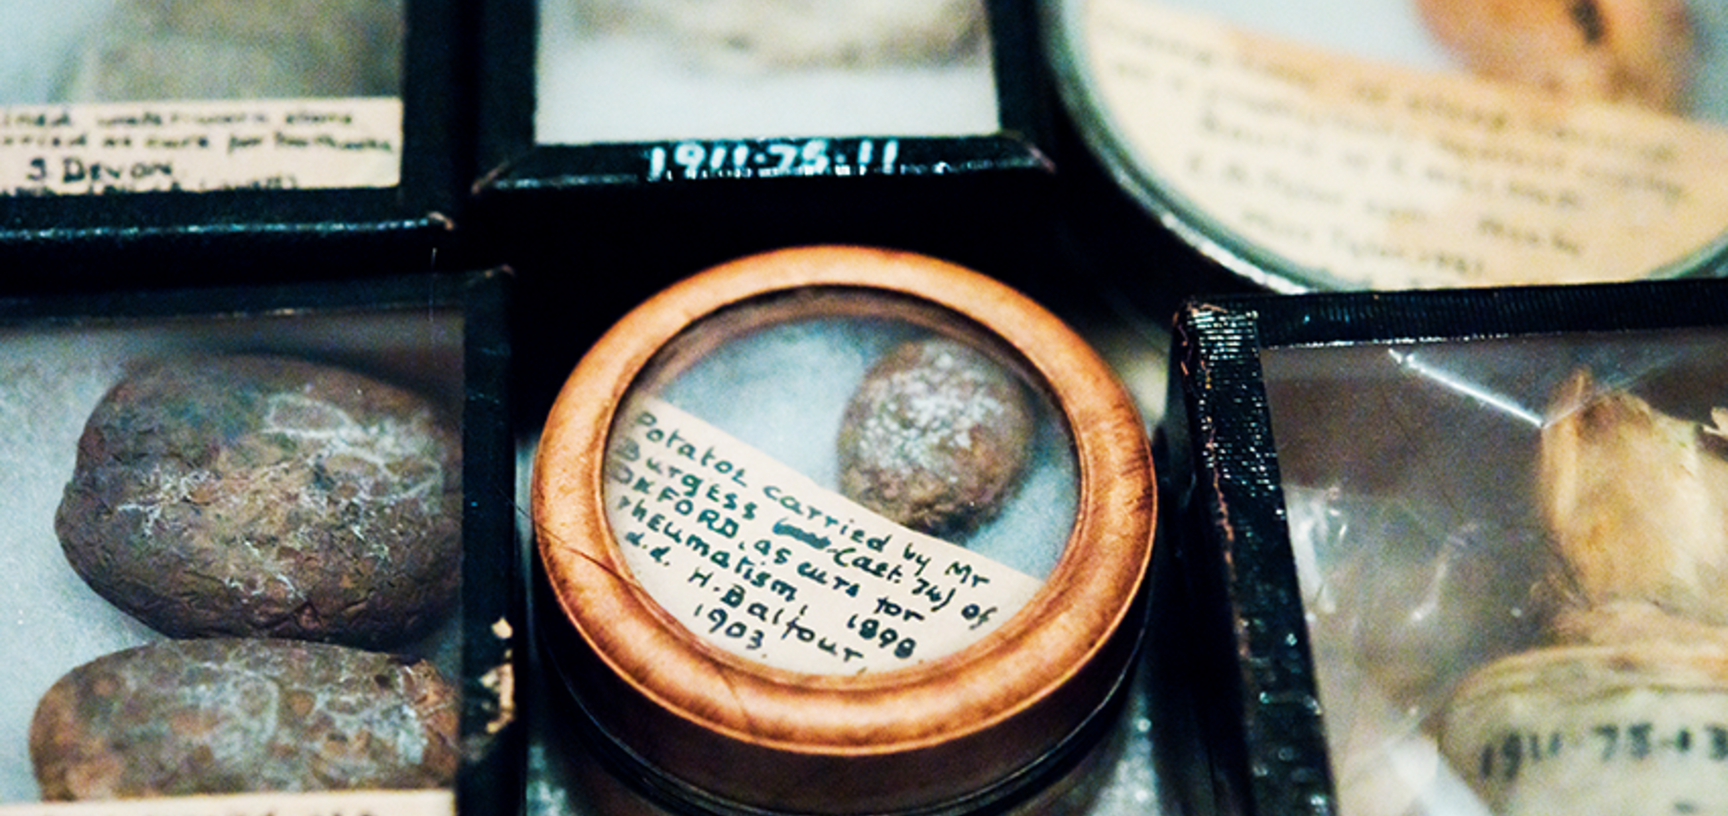 Pitt Rivers collections